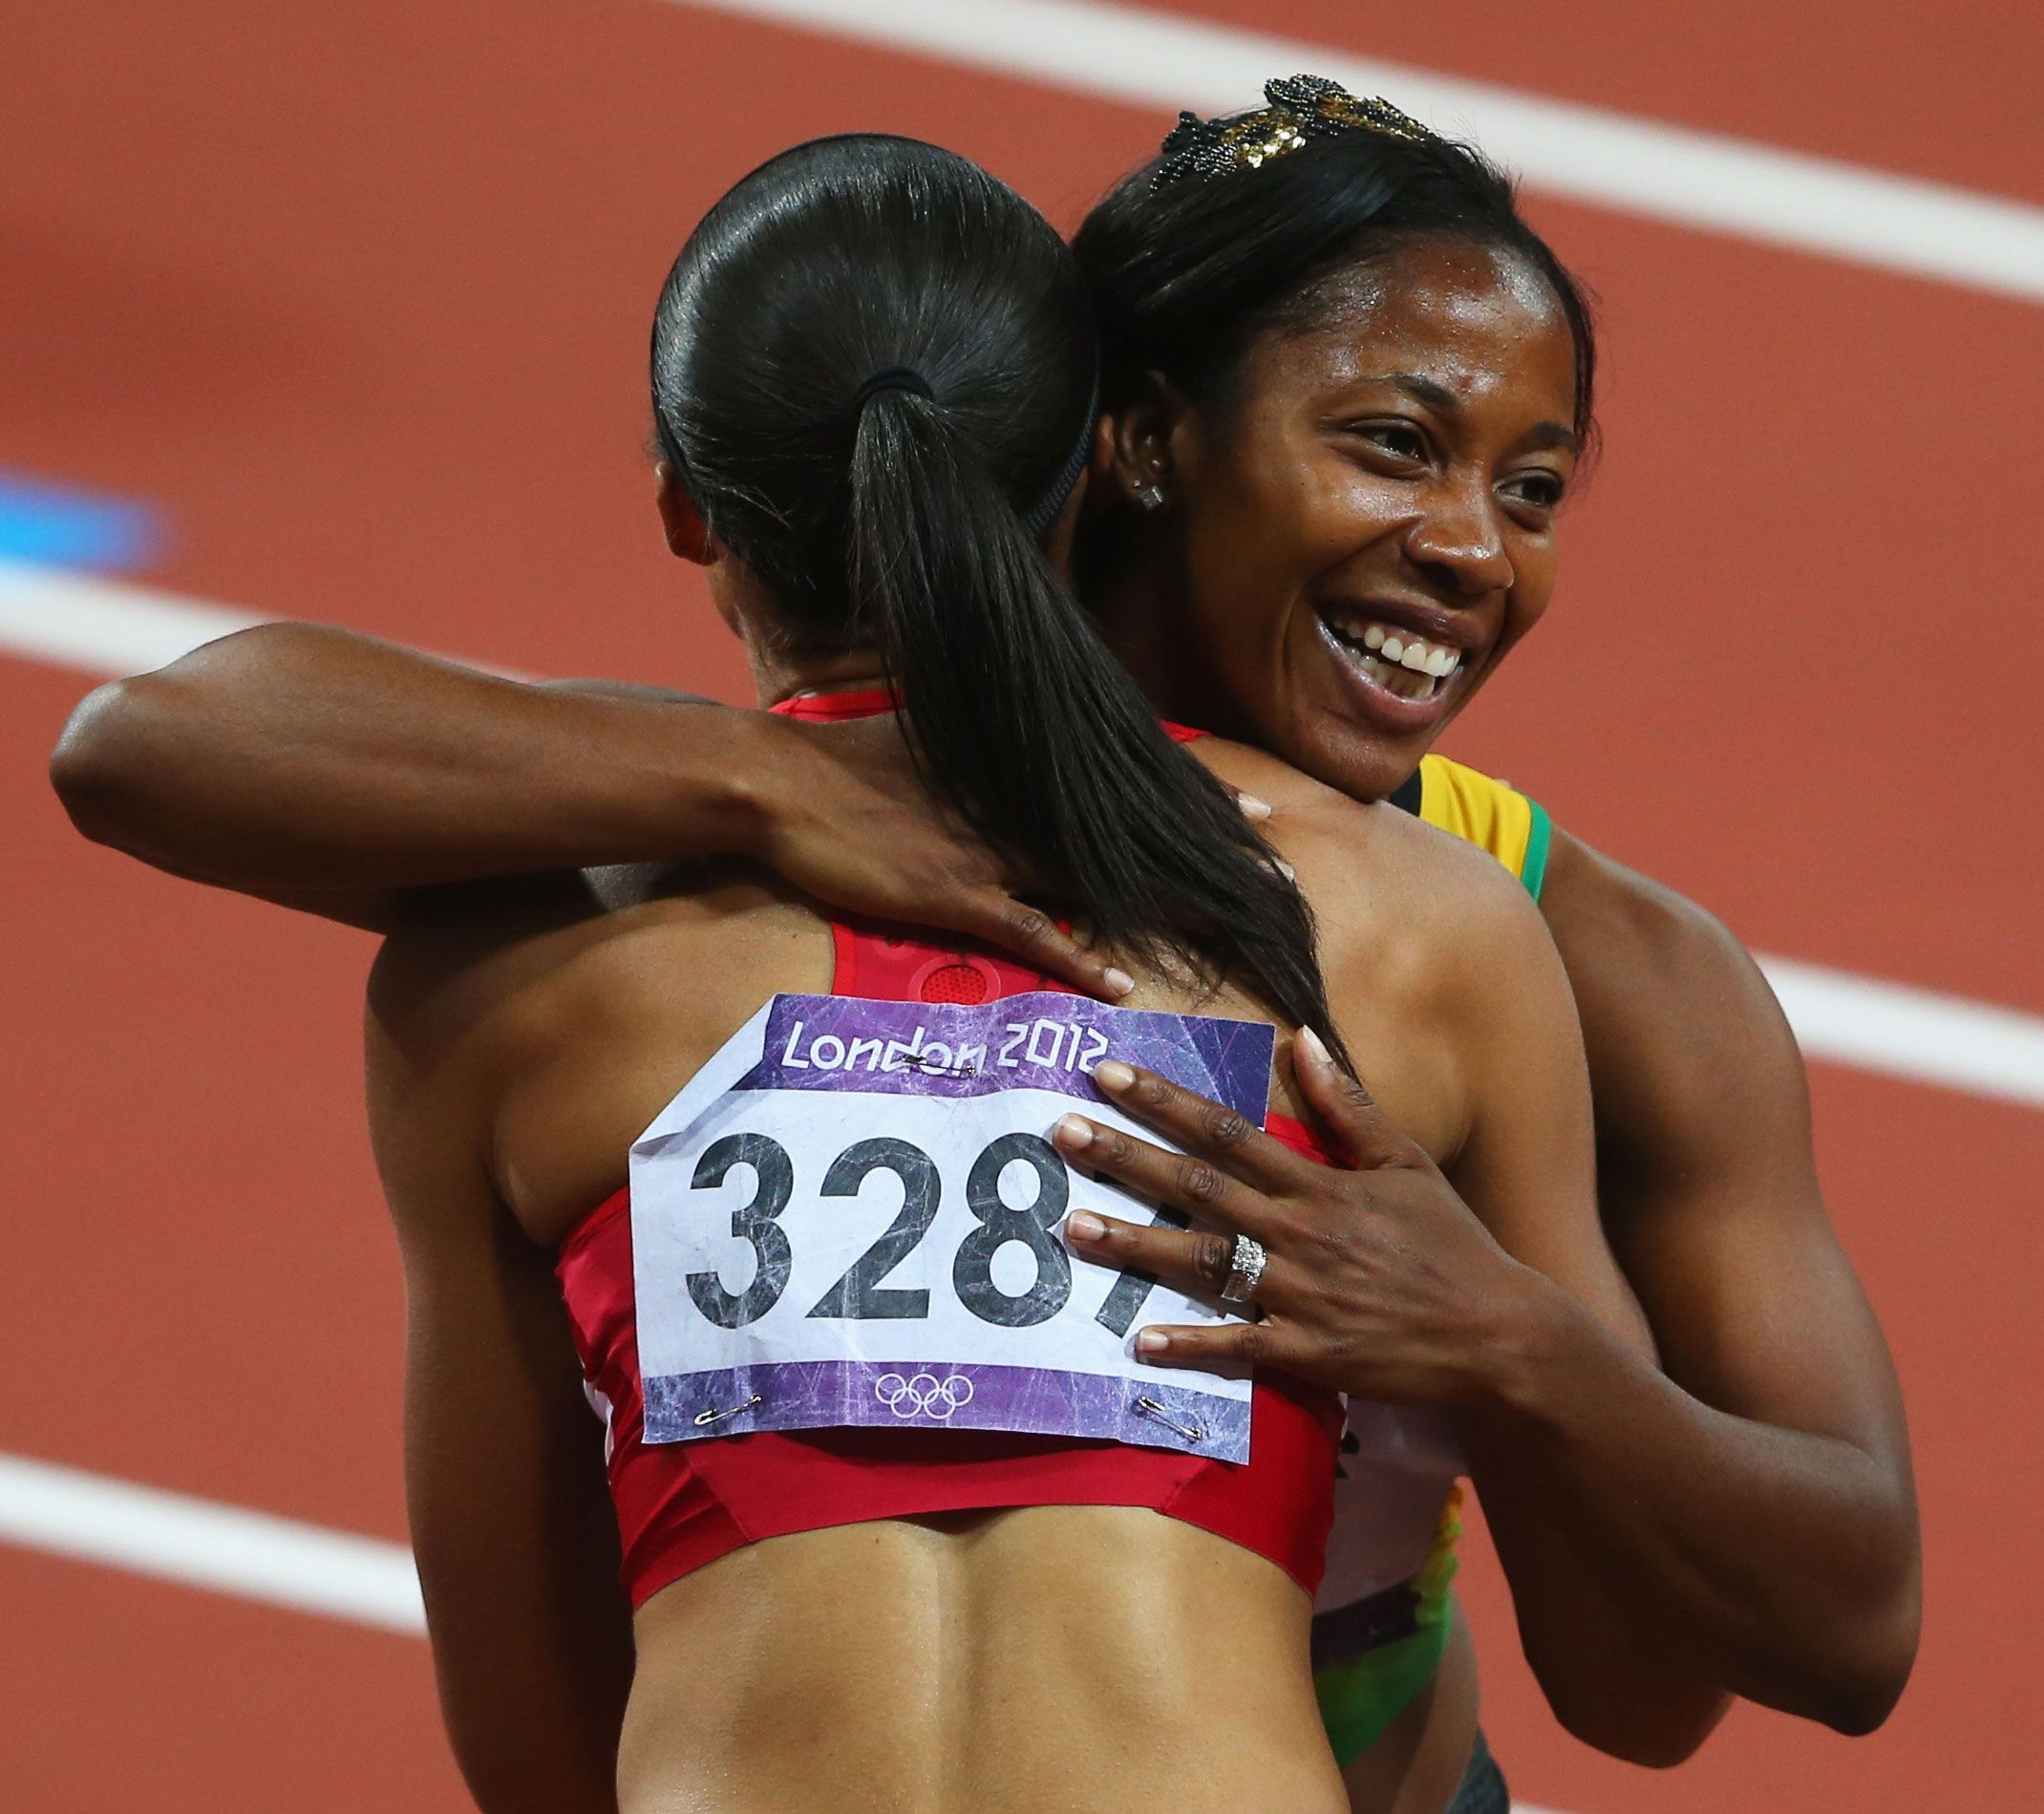 Allyson Felix and Shelly-Ann Fraser-Pryce at the London 2012 Olympic Games